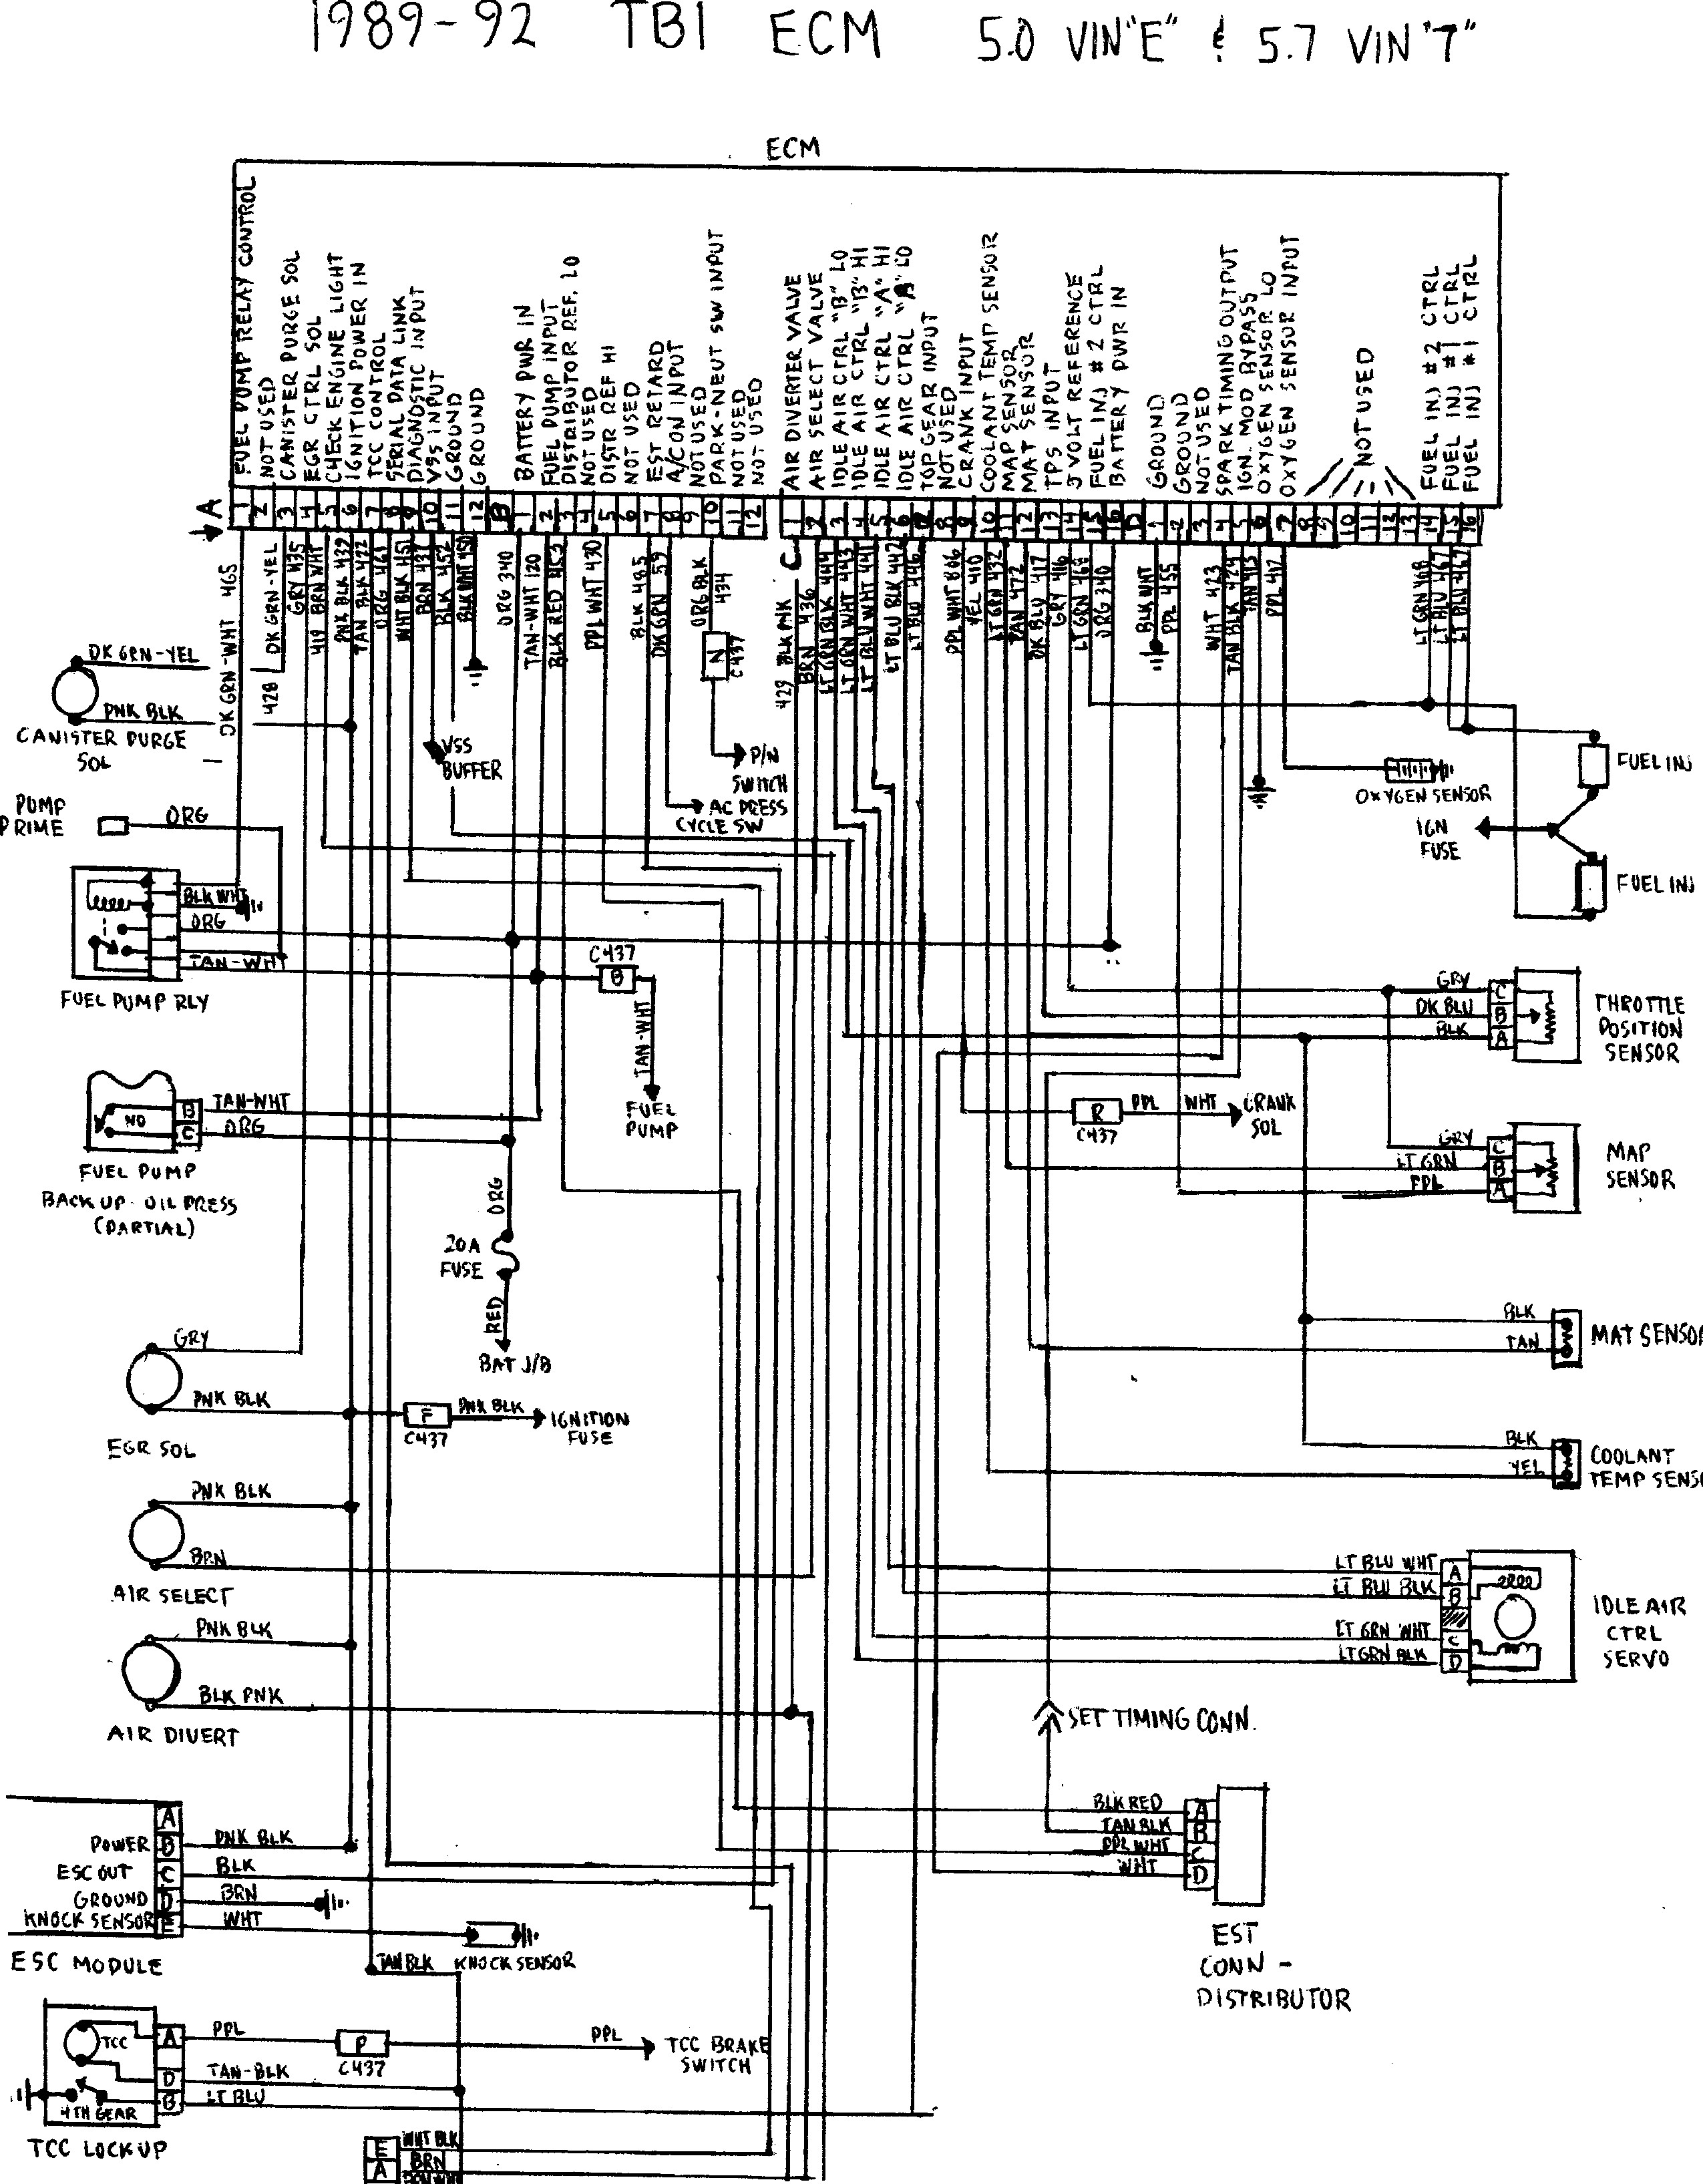 Chevy Power Steering Pump Diagram 1998 Chevy Blazer Wiring Diagram Http Technoanswers Of Chevy Power Steering Pump Diagram